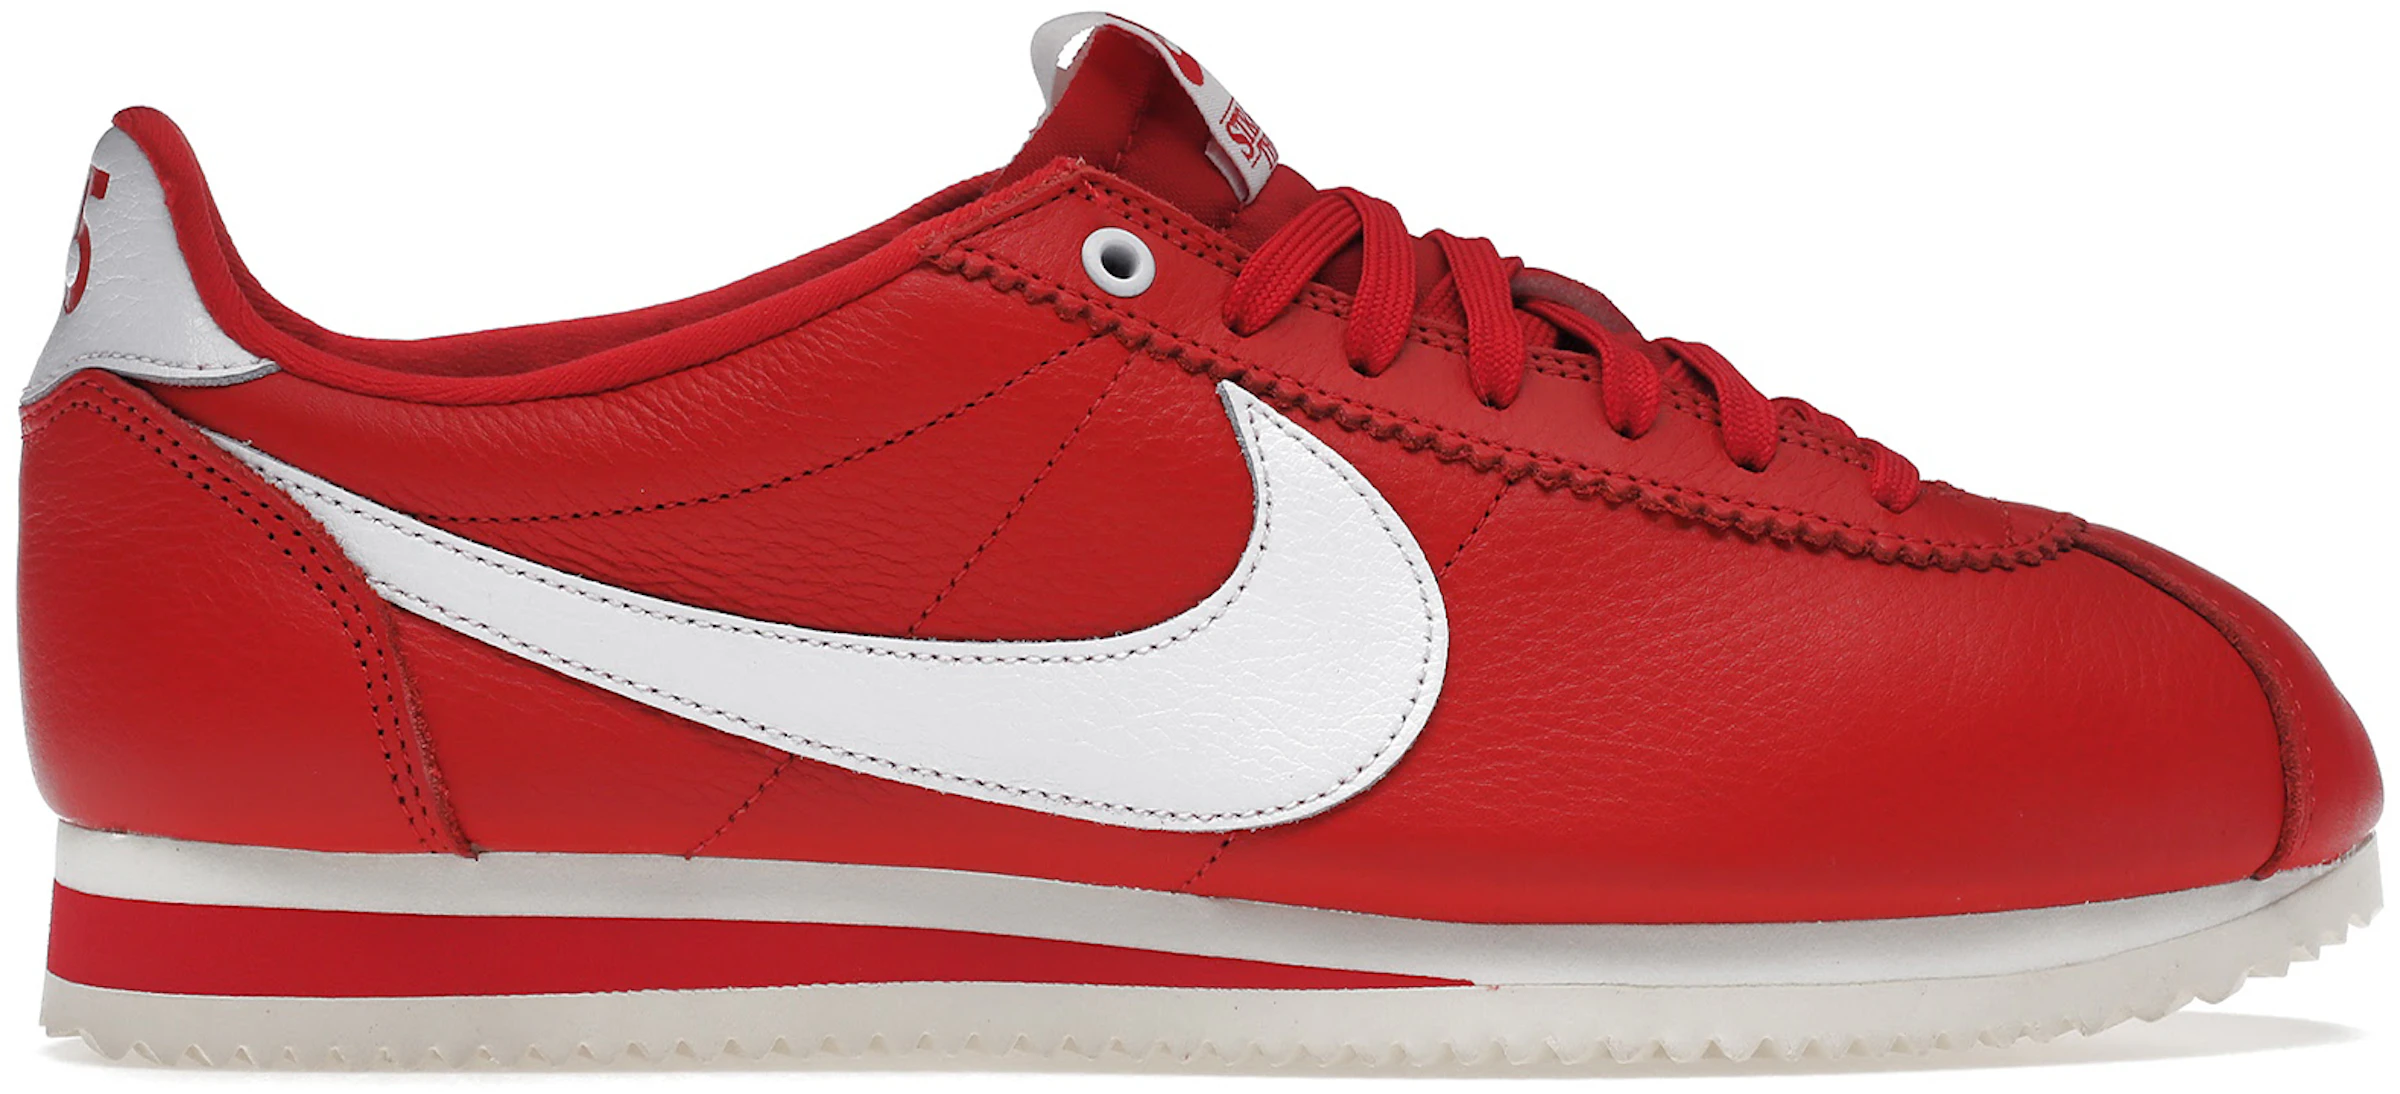 Buy Nike Cortez for Men and Women - StockX